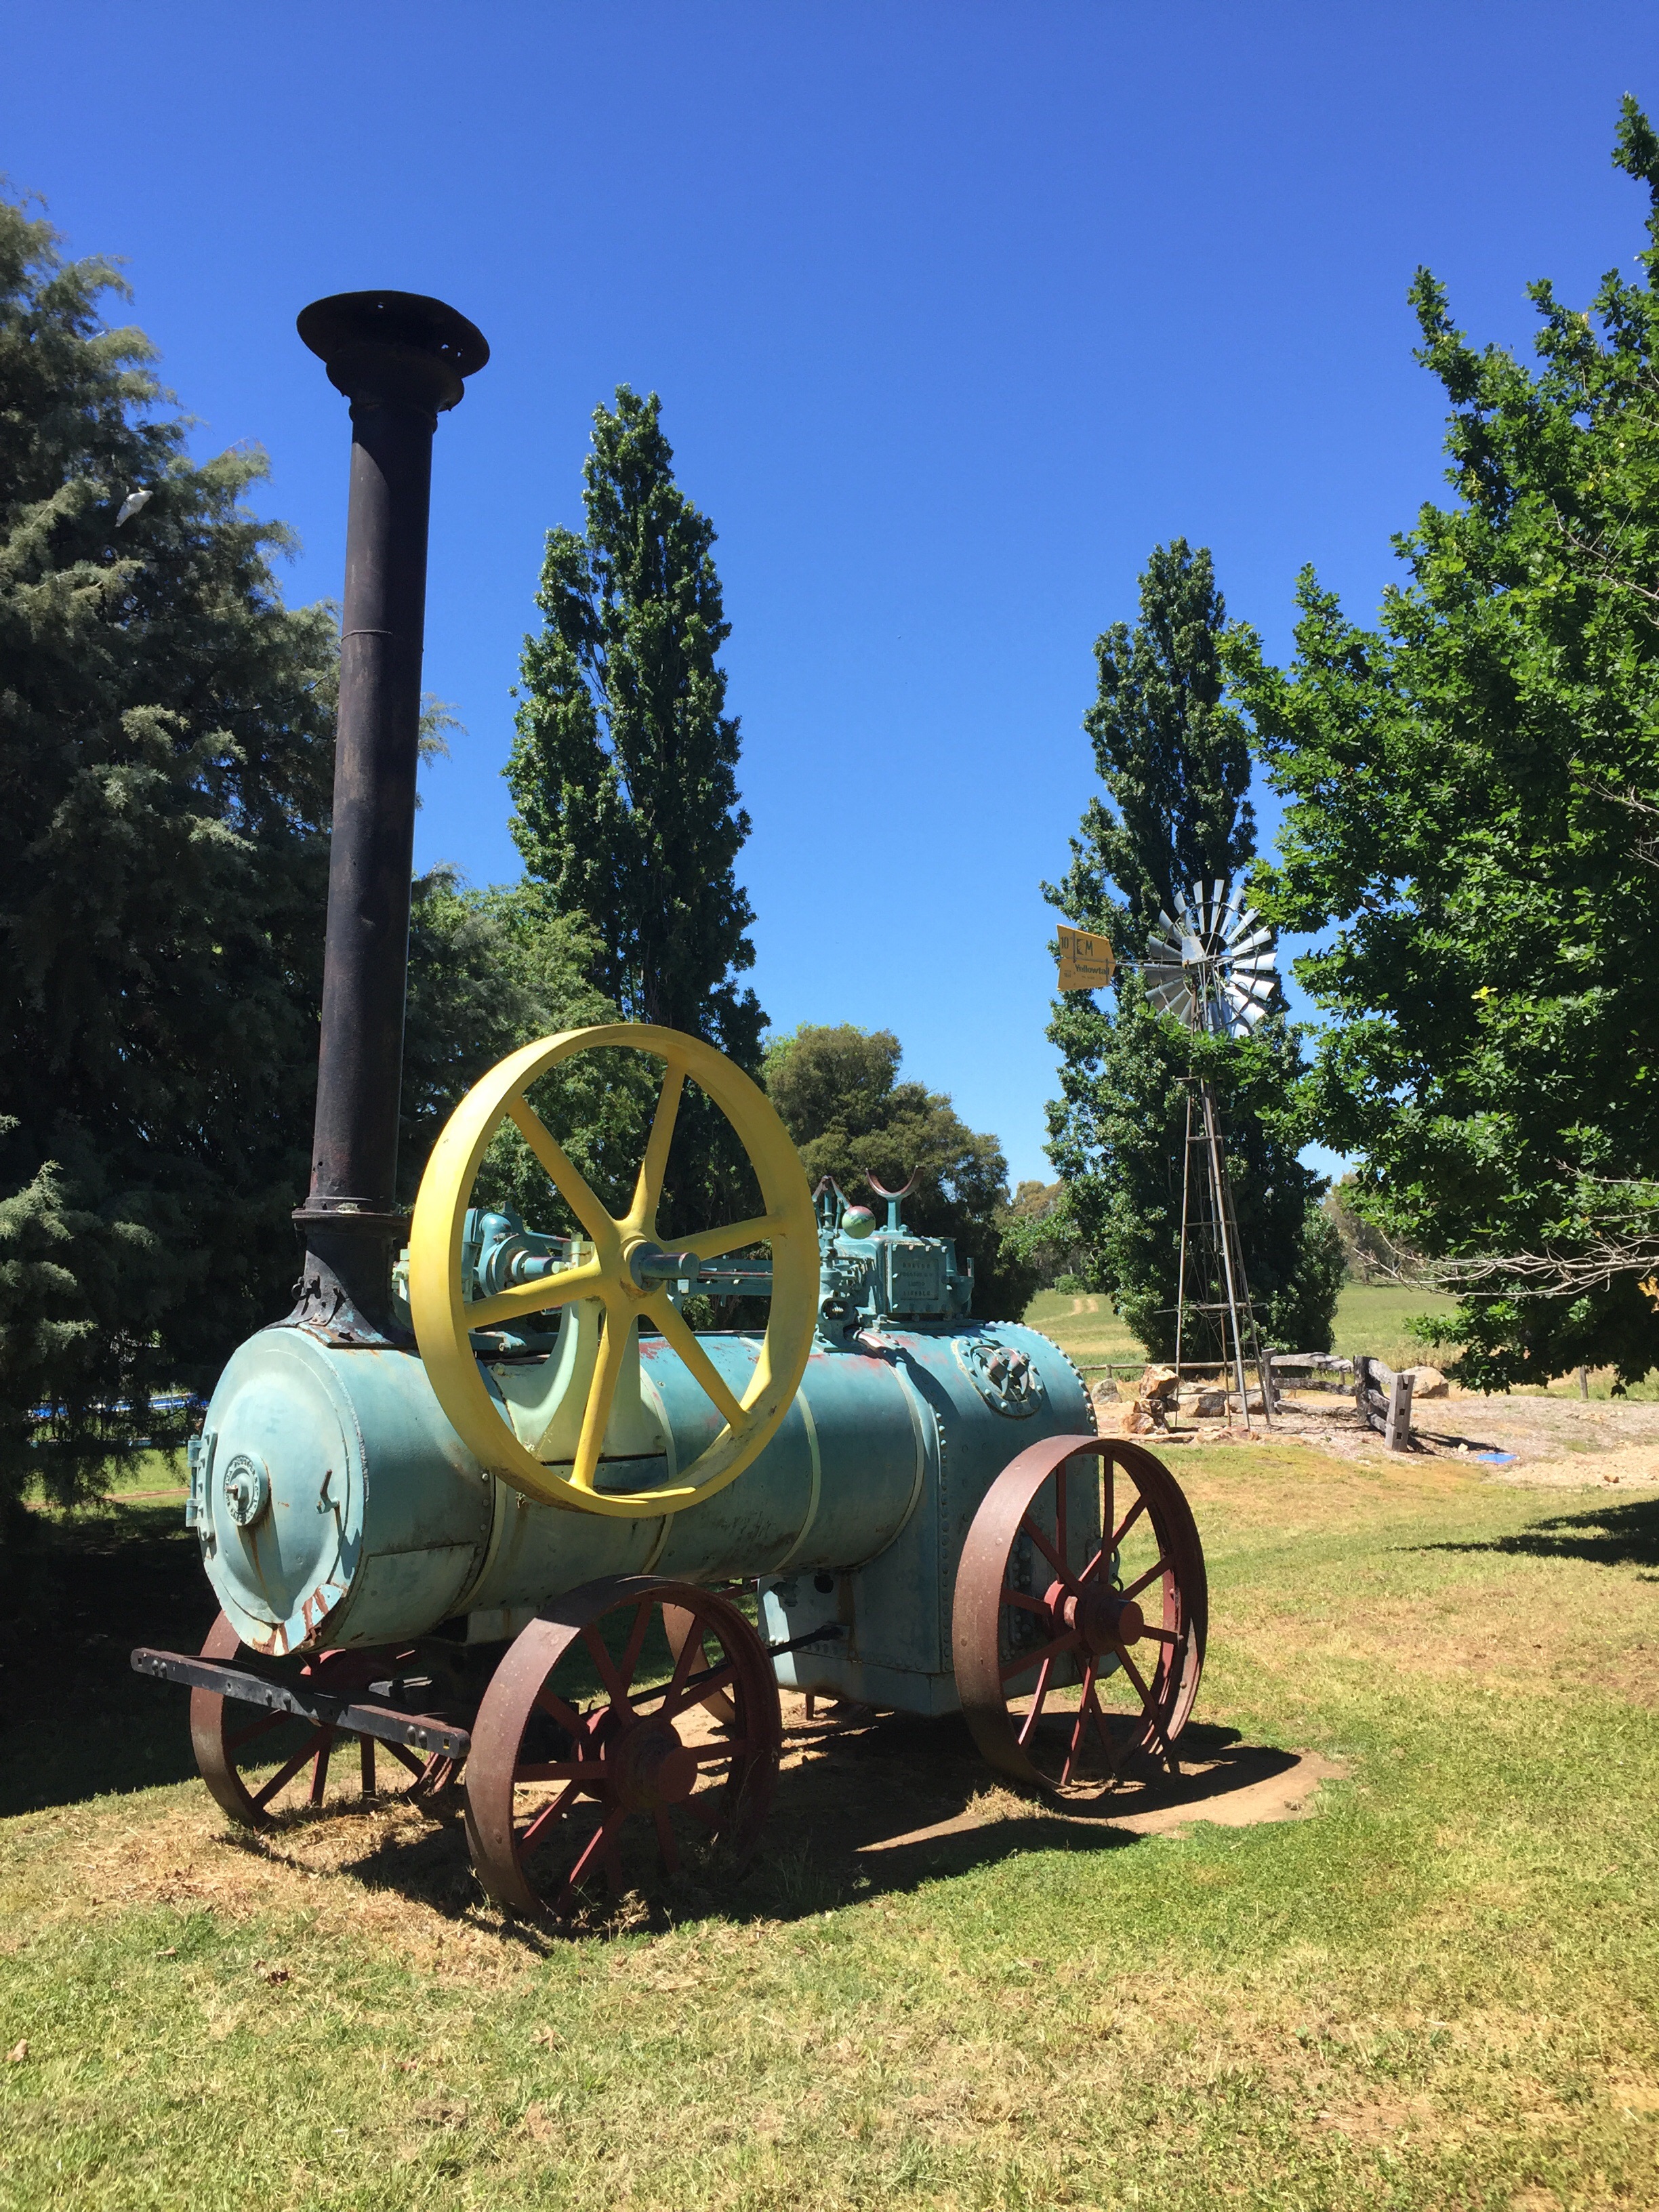 OLd machine and windmill in the Jugiong park.